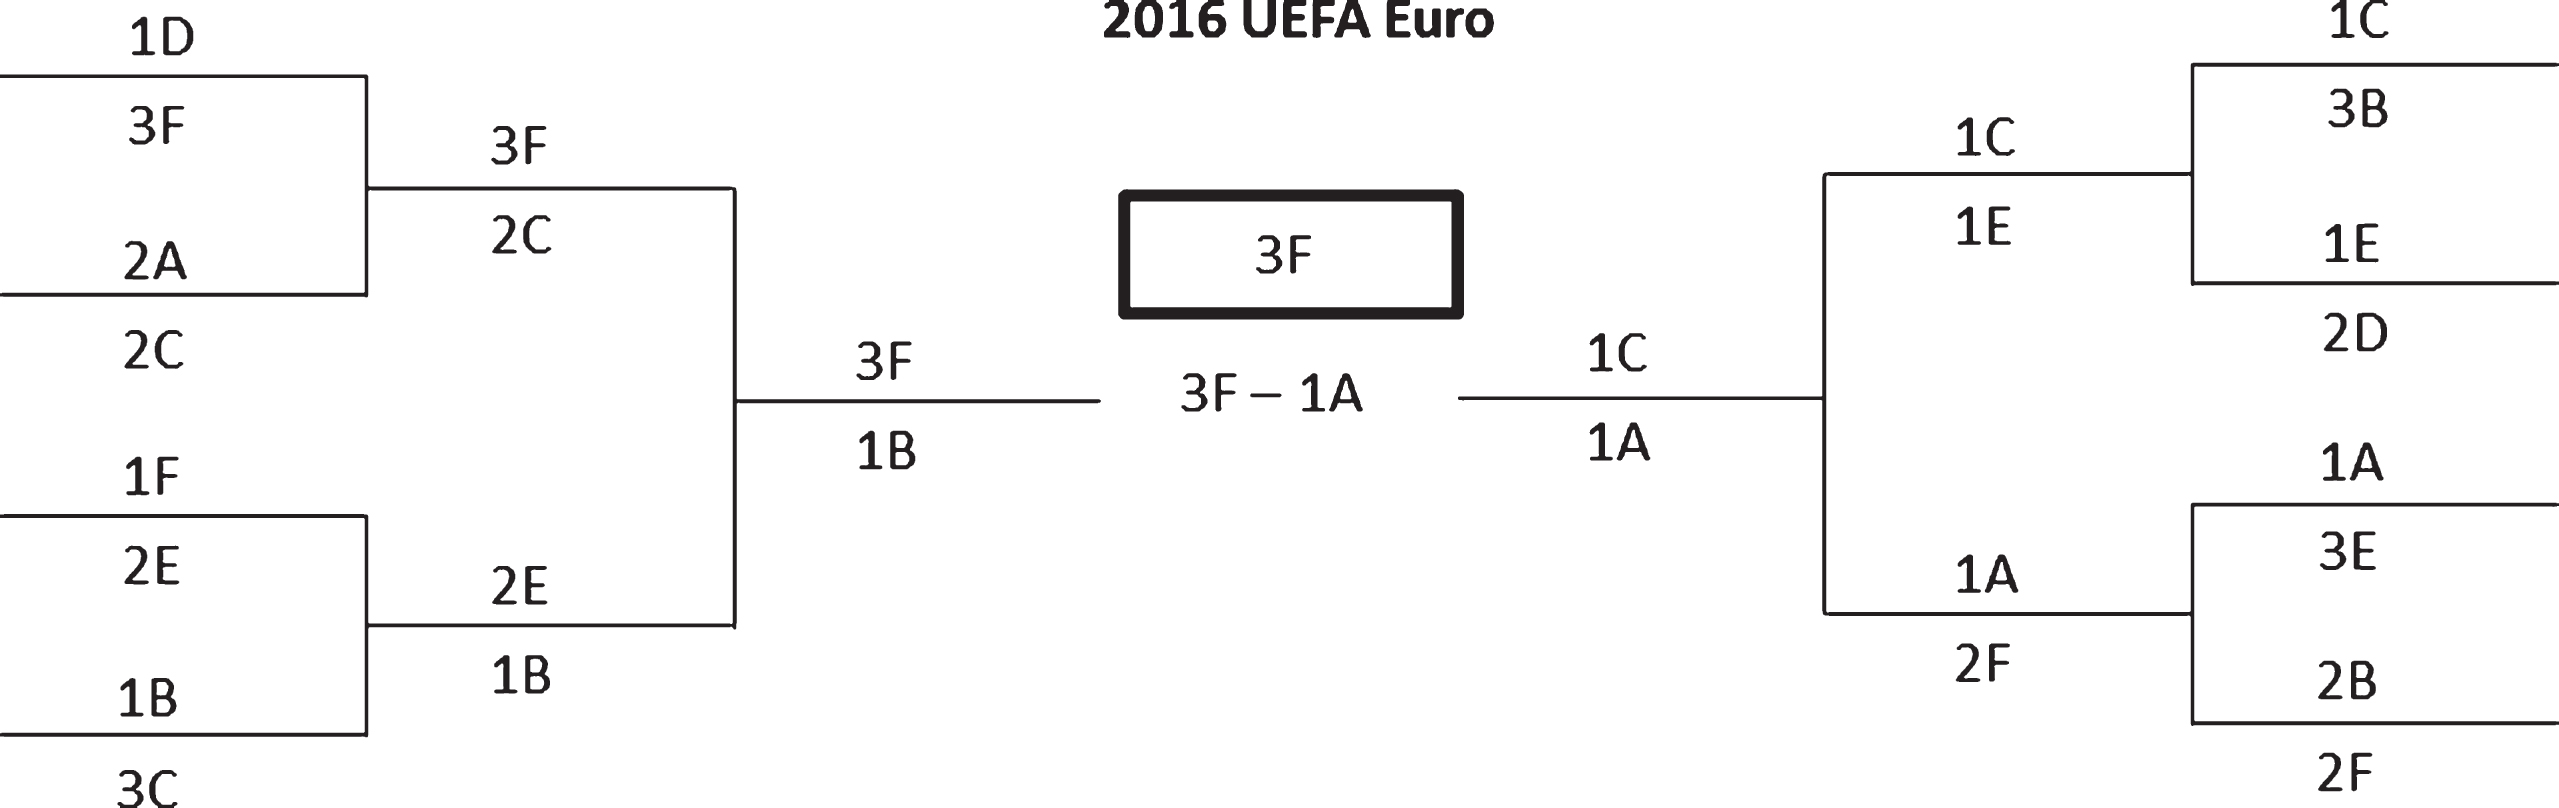 Results of the knockout stage of the UEFA Euro 2016.